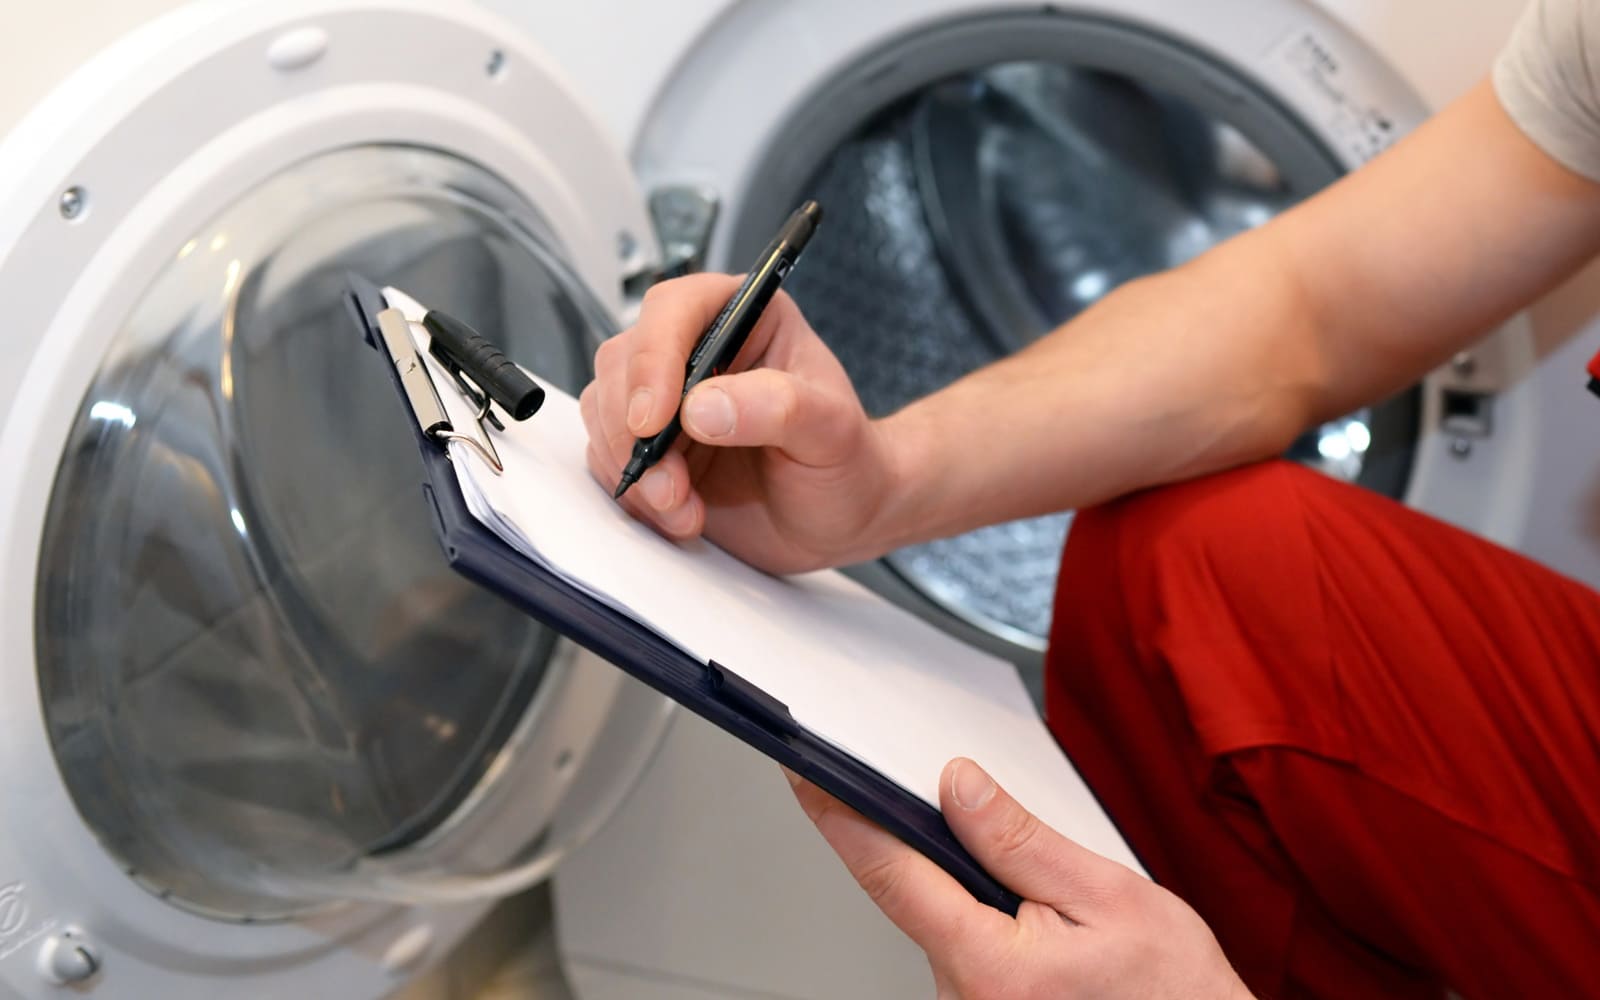 6 Reasons to Hire an Appliance Repair Professional